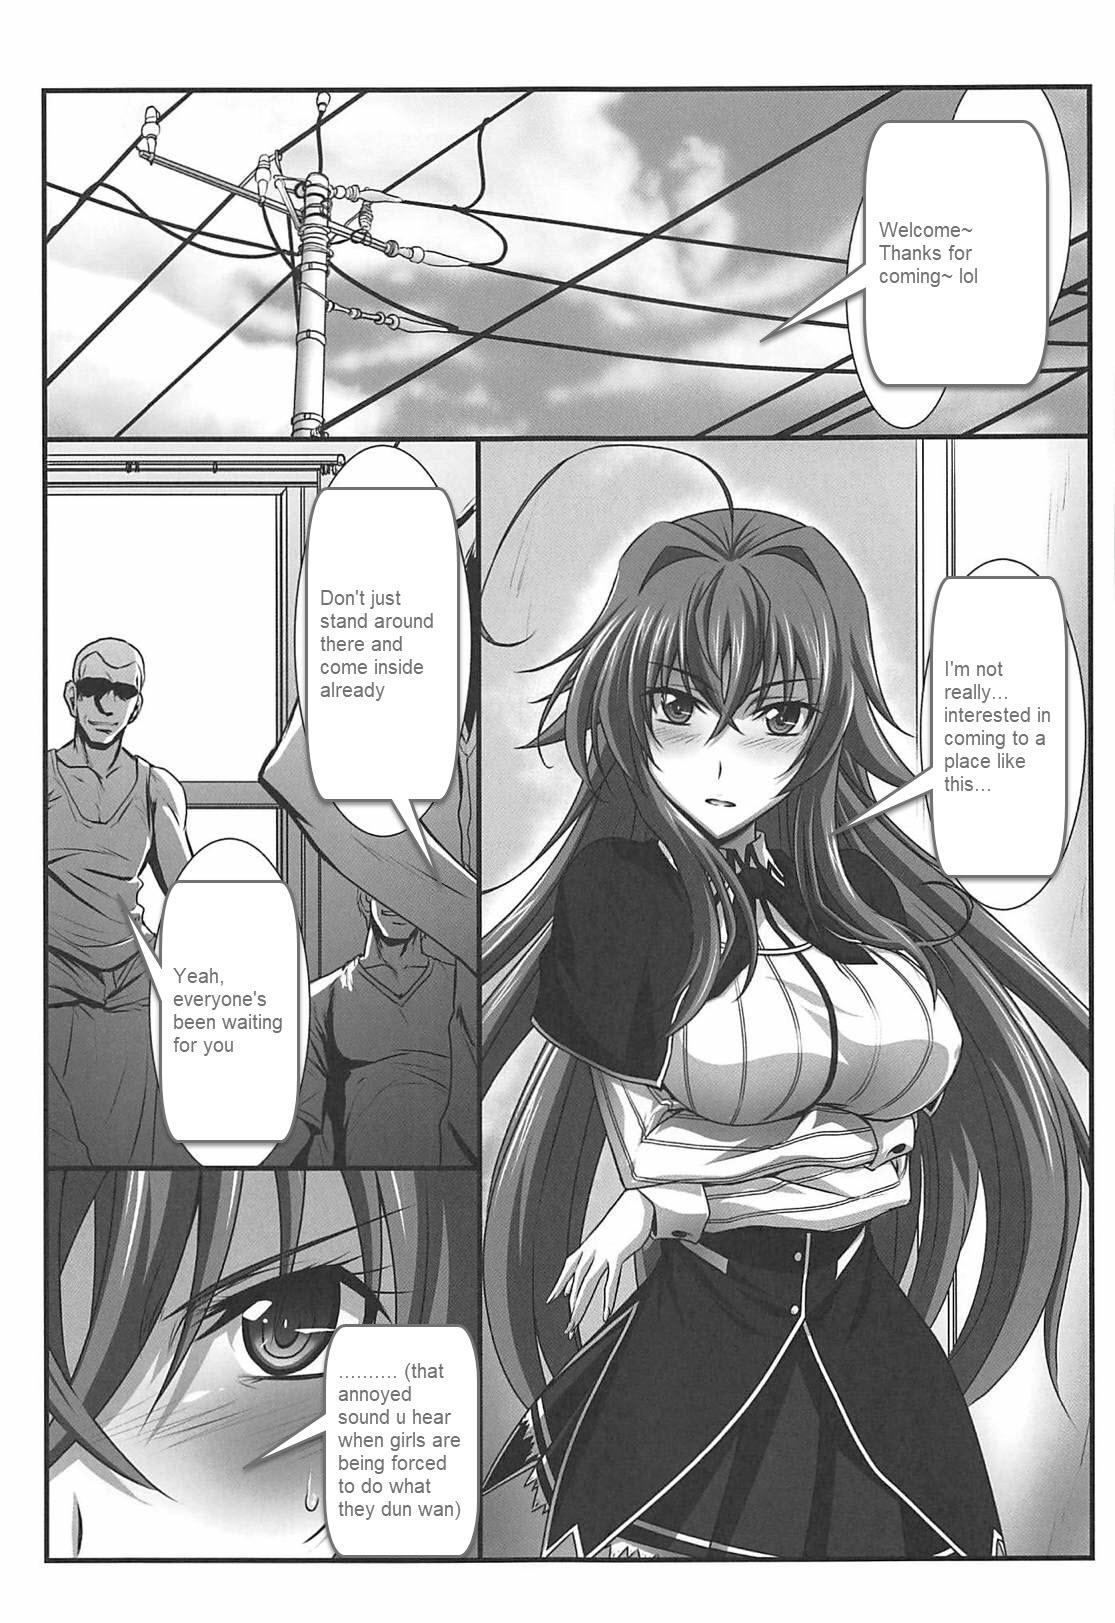 Trimmed SPIRAL ZONE DxD II - Highschool dxd Amatuer Porn - Page 4